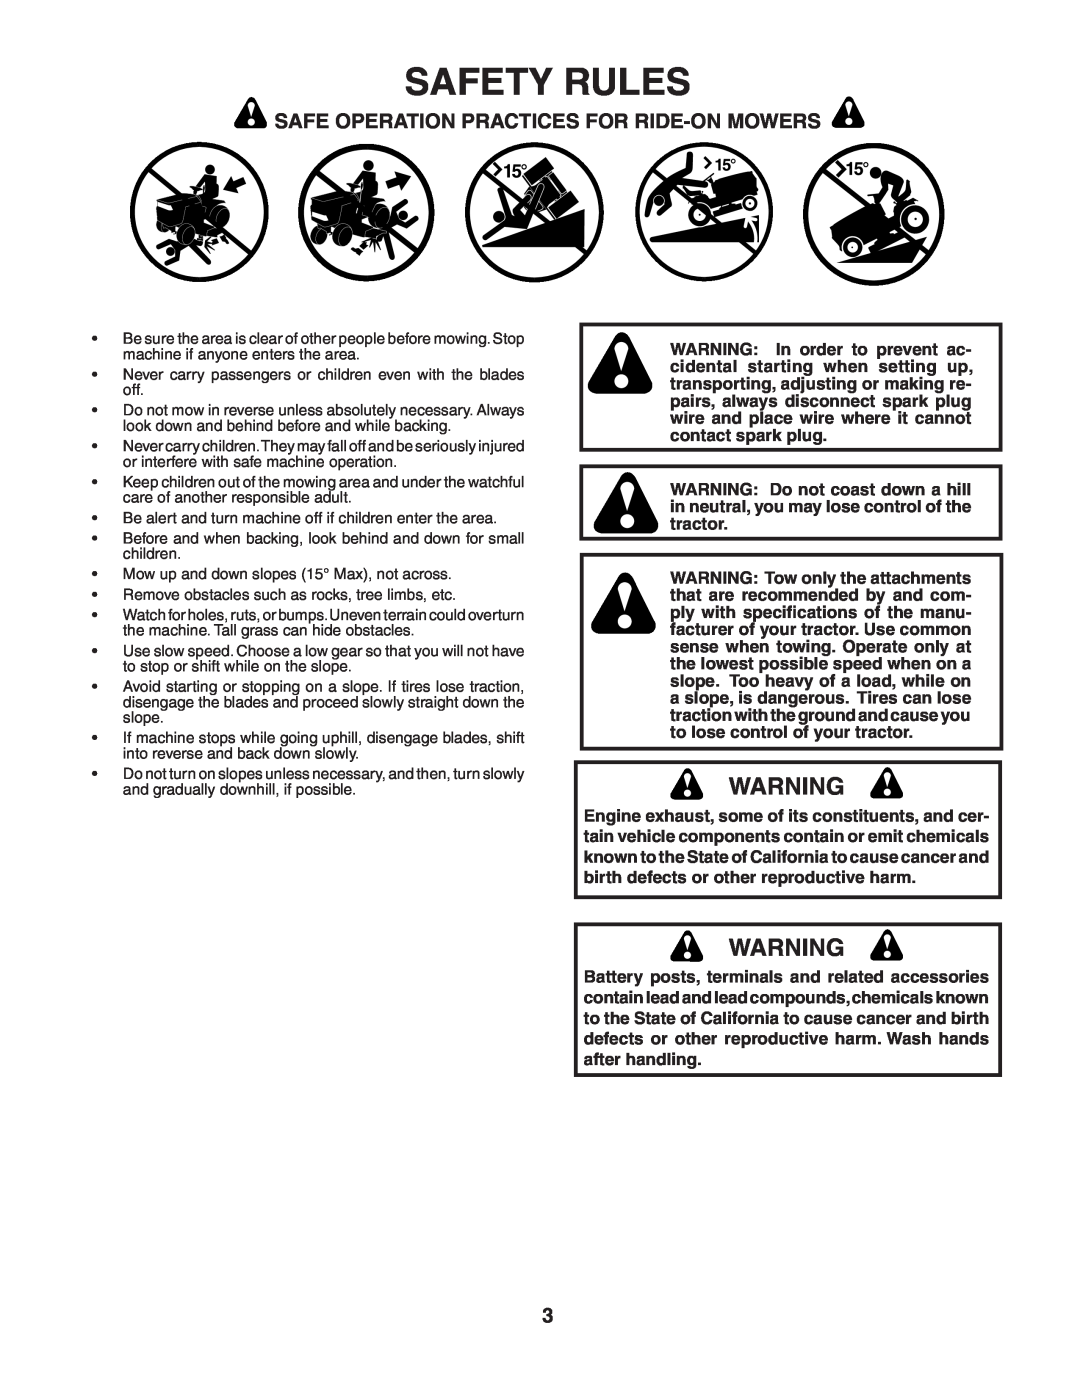 Poulan 187594 manual Safety Rules, Safe Operation Practices For Ride-On Mowers 